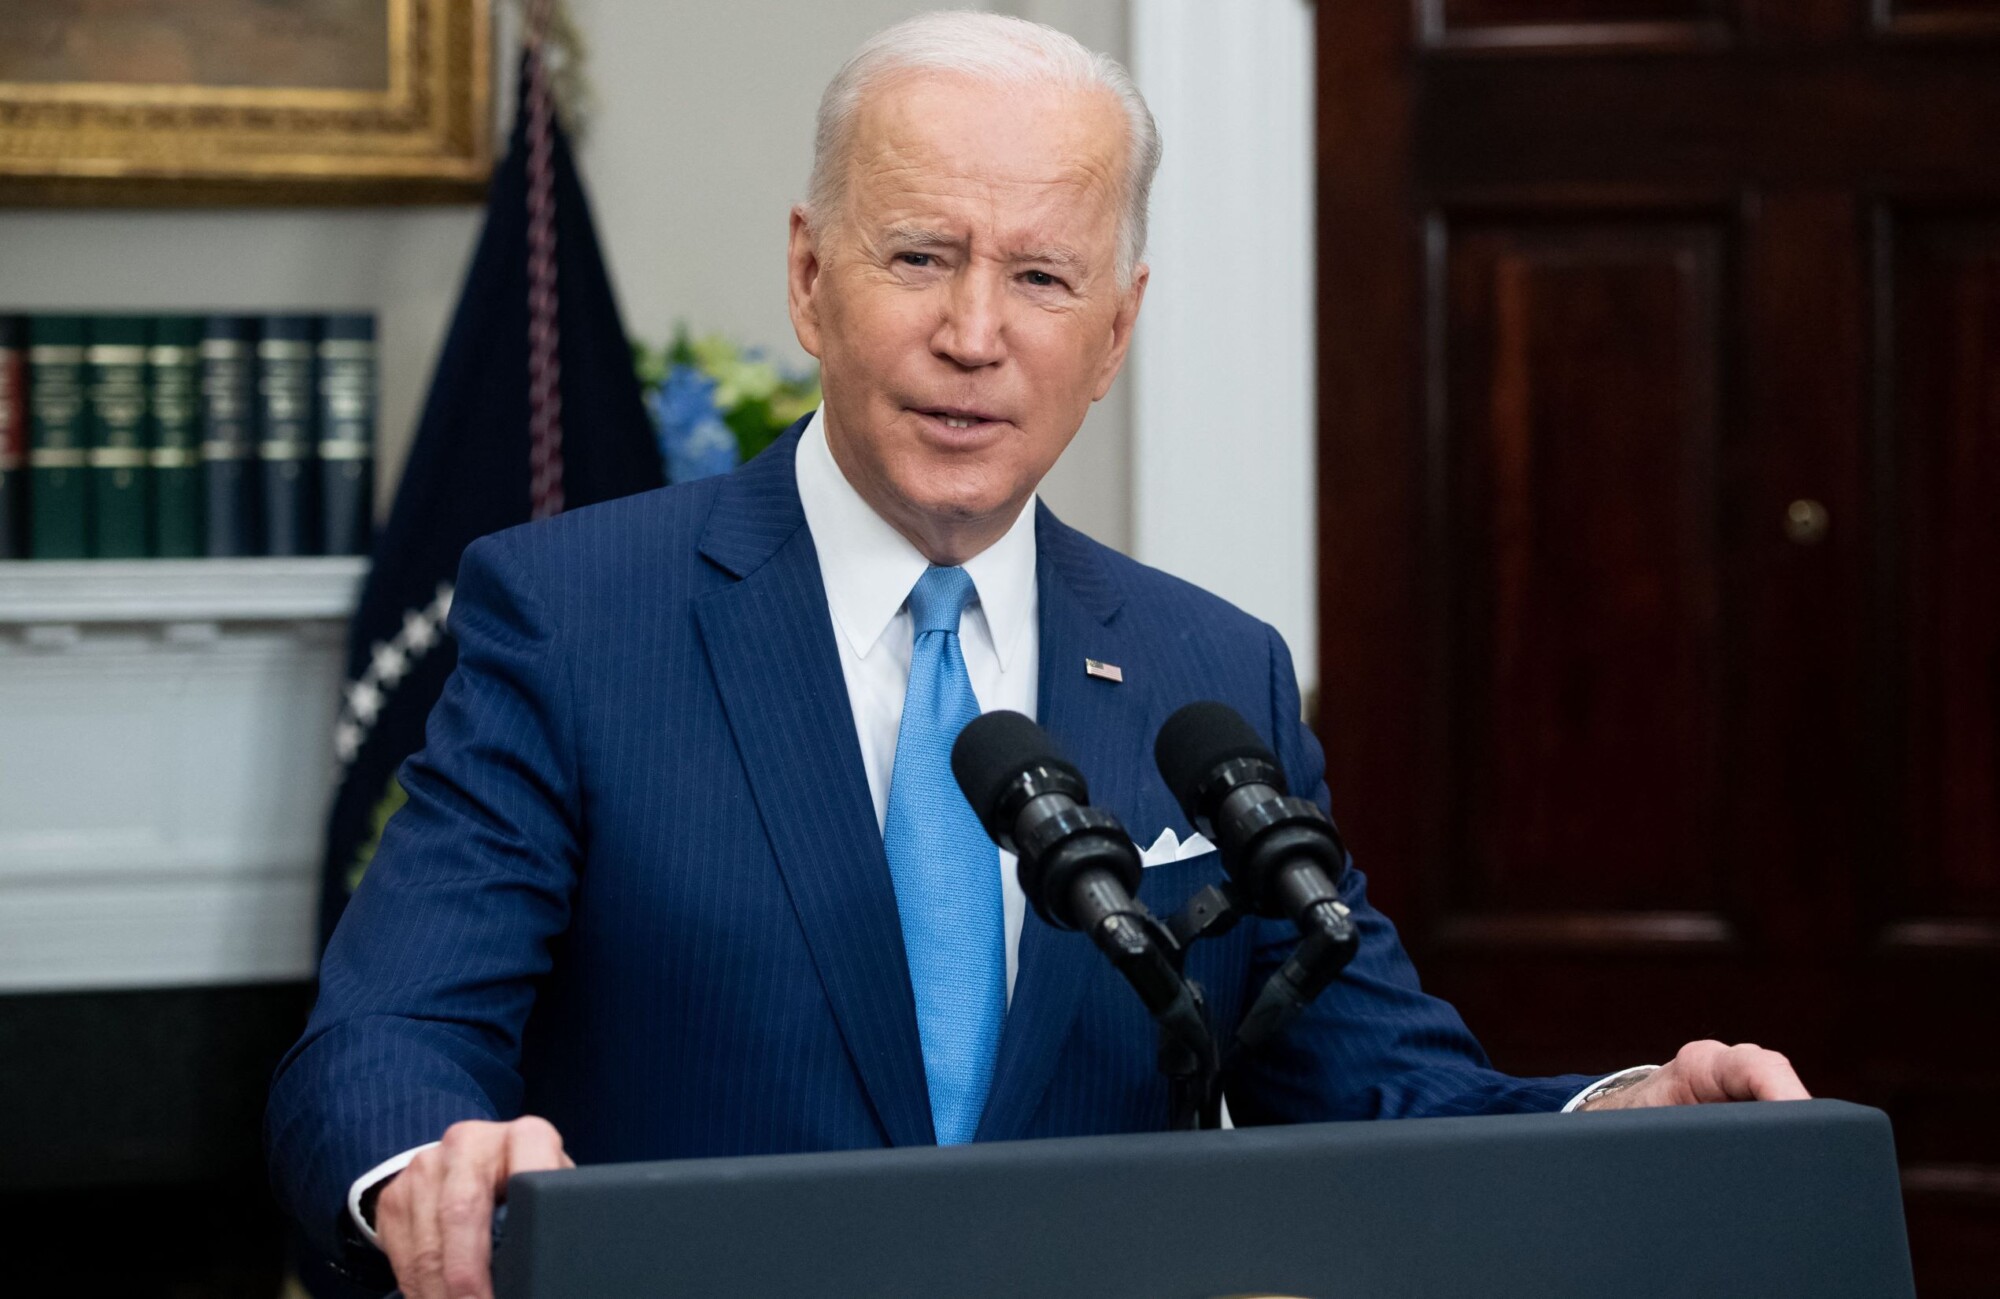 Biden Says He Will Appoint a Black Woman to SCOTUS by the End of February